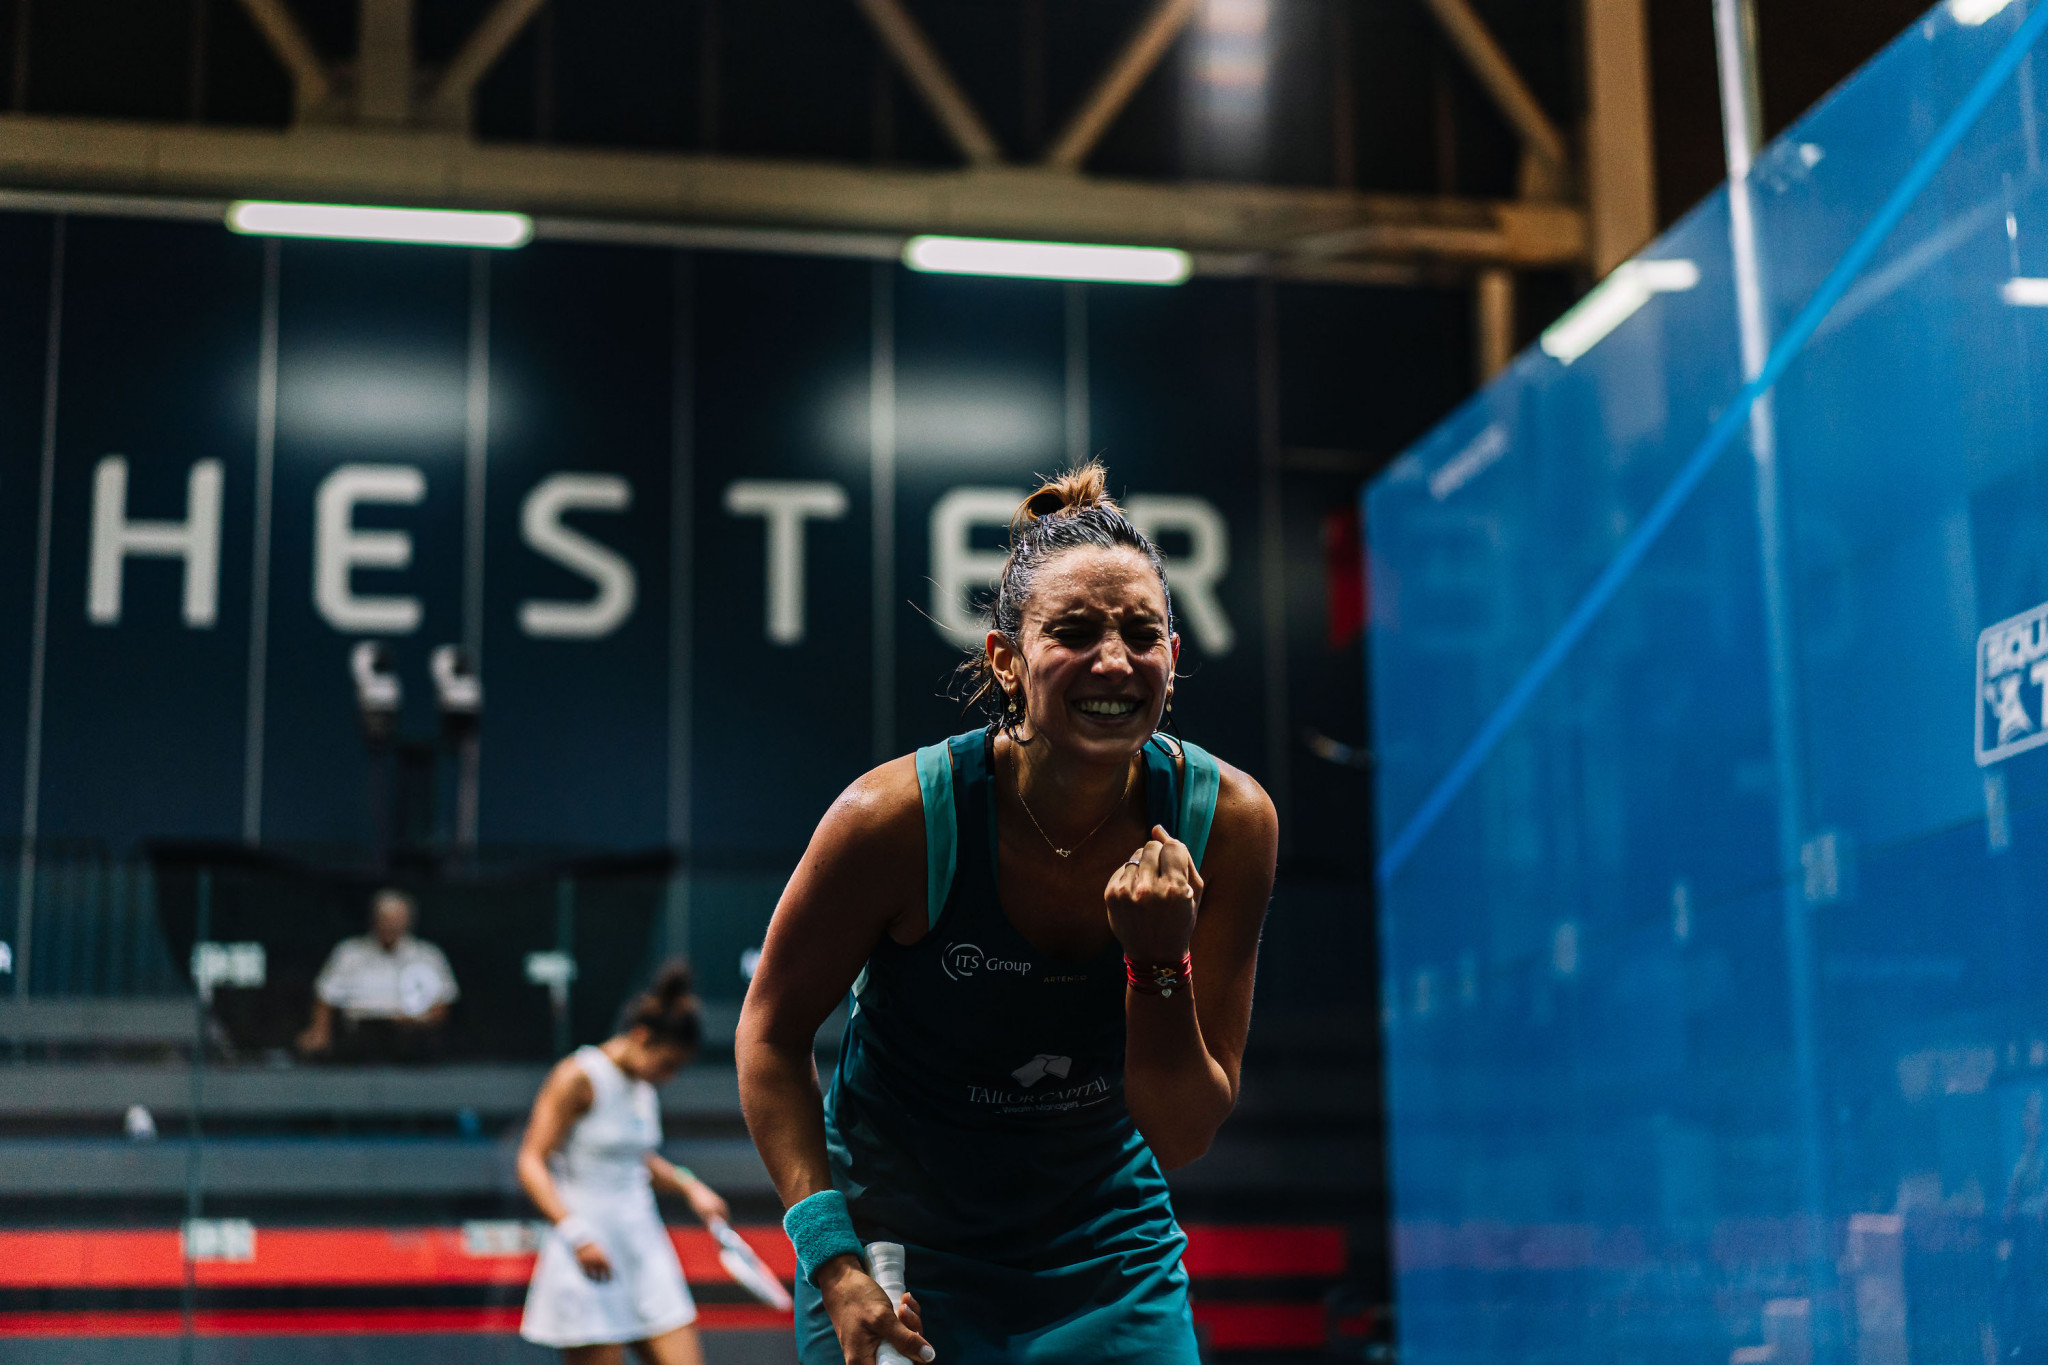 Top seeds Serme and ElShorbagy win five-game Manchester Open semi-finals